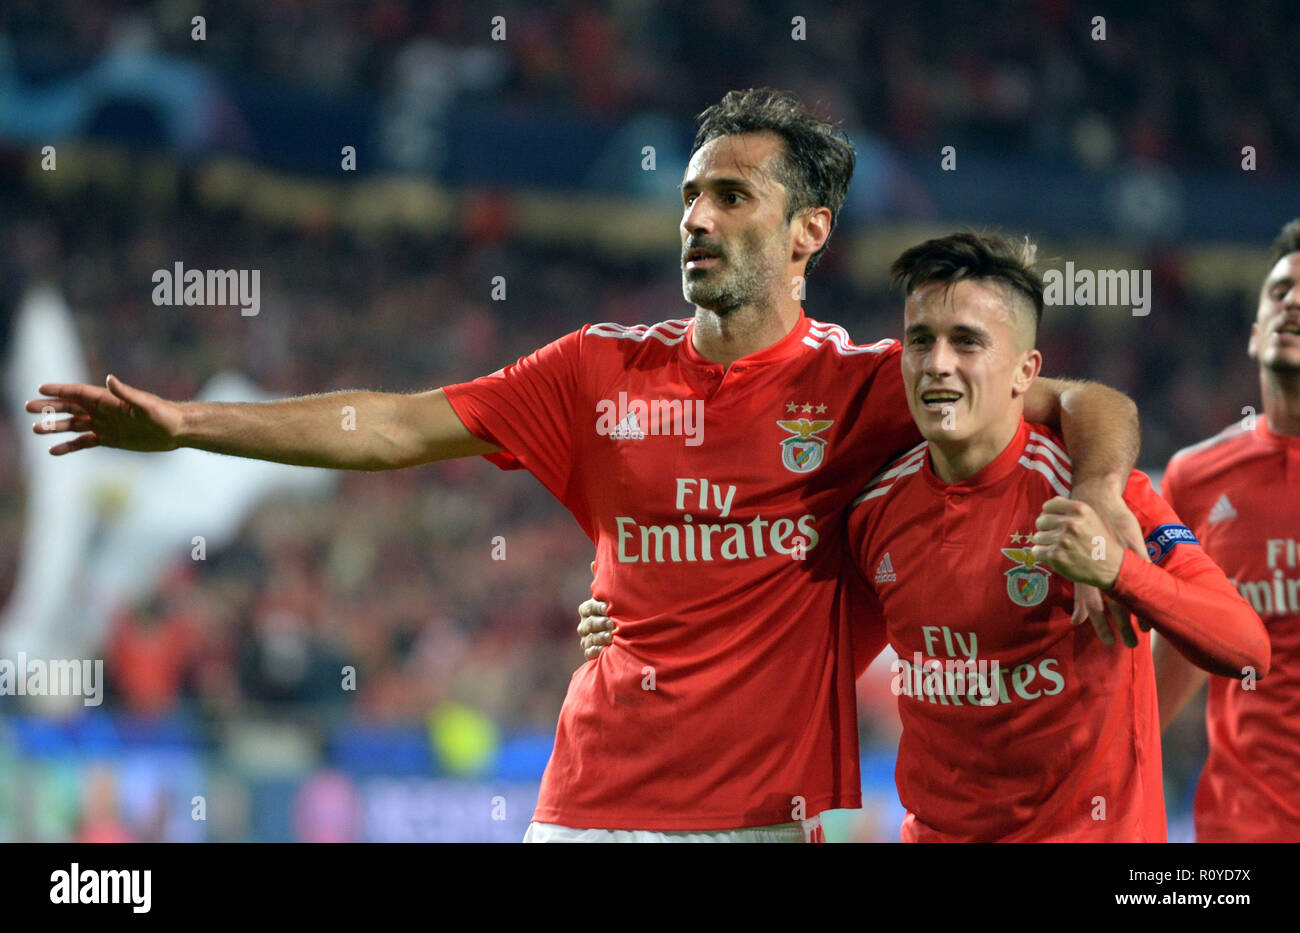 Lisbon, Portugal. 7th Nov, 2018. Jonas (L) of Benfica celebrates with teammate Franco Cervi after scoring a goal during the European Champions League Group E fourth round soccer match between SL Benfica and AFC Ajax at Luz Stadium in Lisbon, Portugal, on Nov. 7, 2018. The match ended with a 1-1 tie. Credit: Zhang Liyun/Xinhua/Alamy Live News Stock Photo